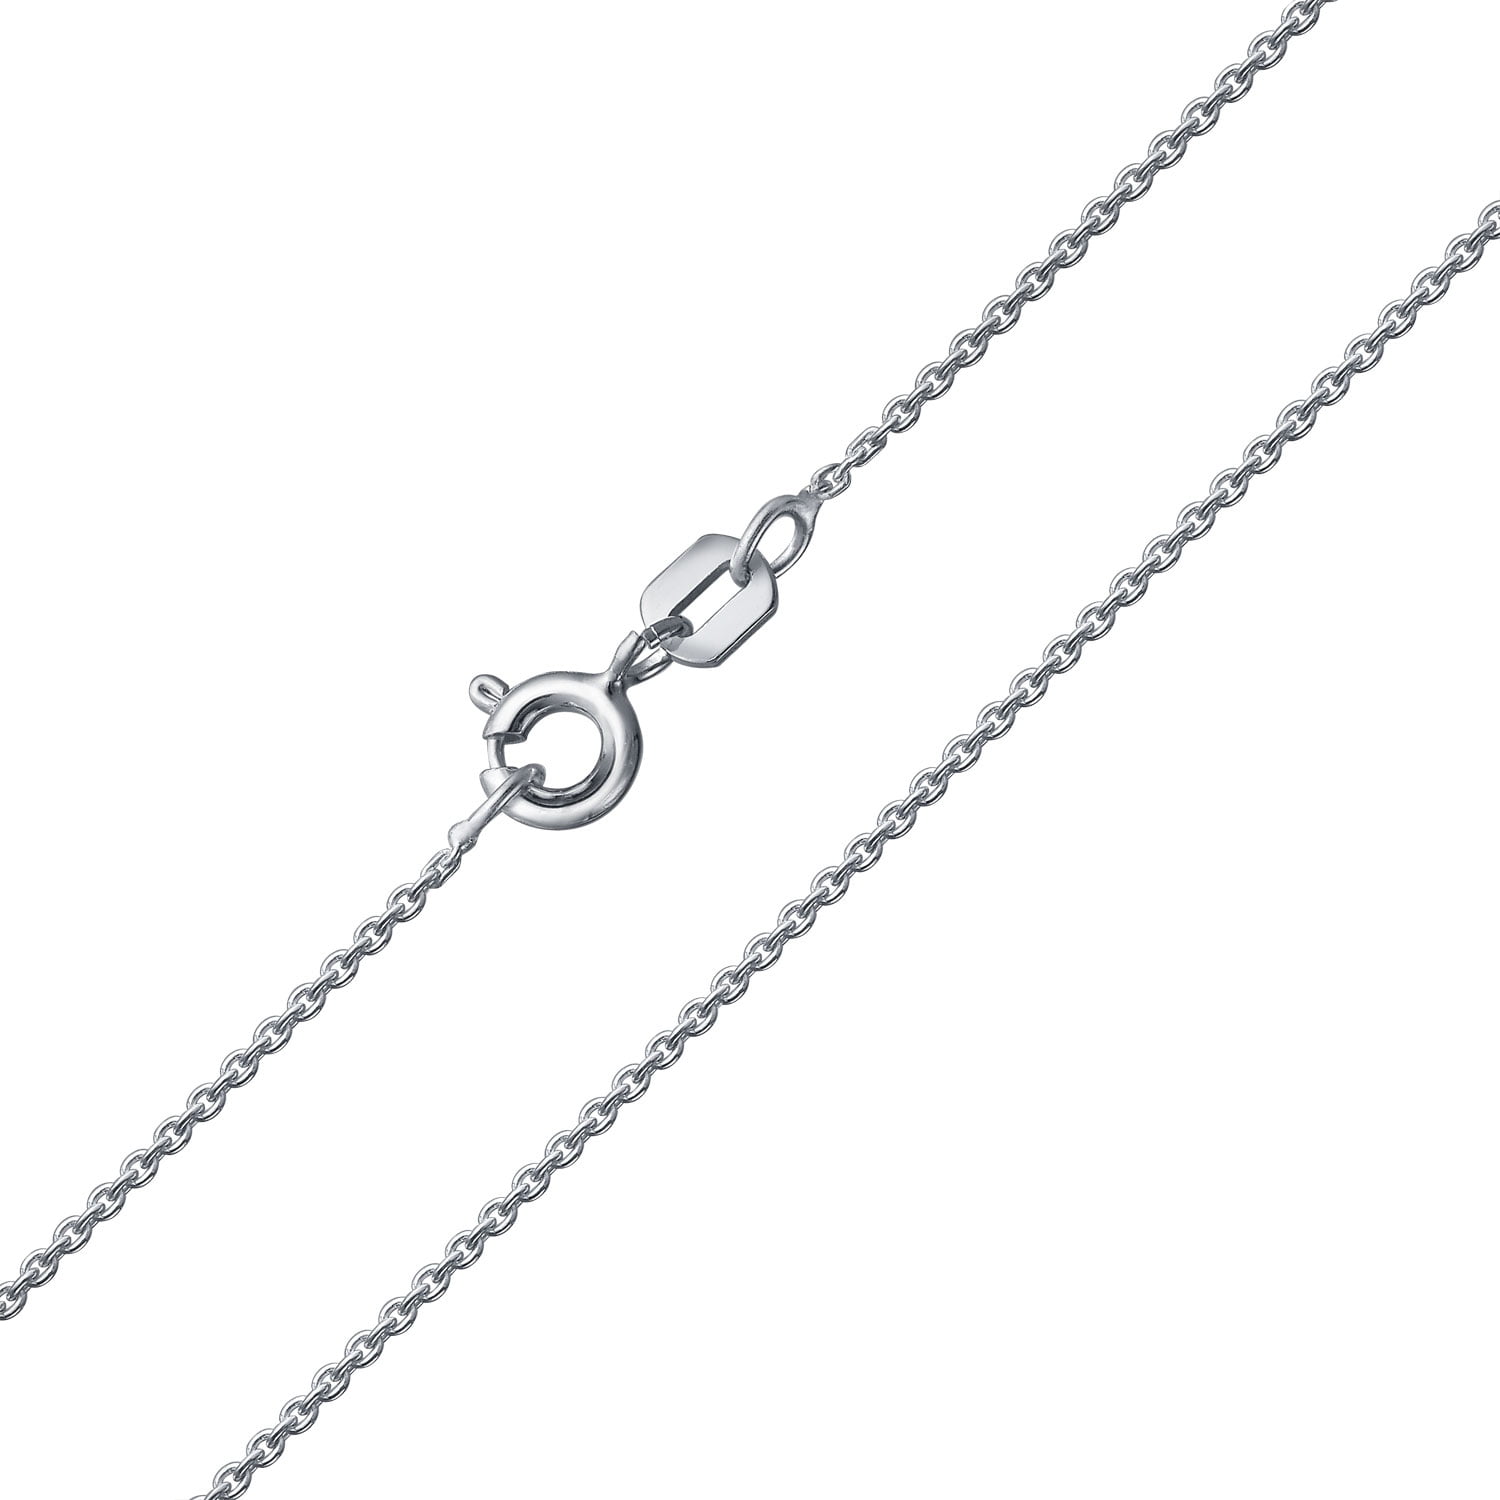 Simple Thin 019 Gauge 925 Sterling Silver Box Chain Necklace For Women For Teen 16 18 20 24 Inch